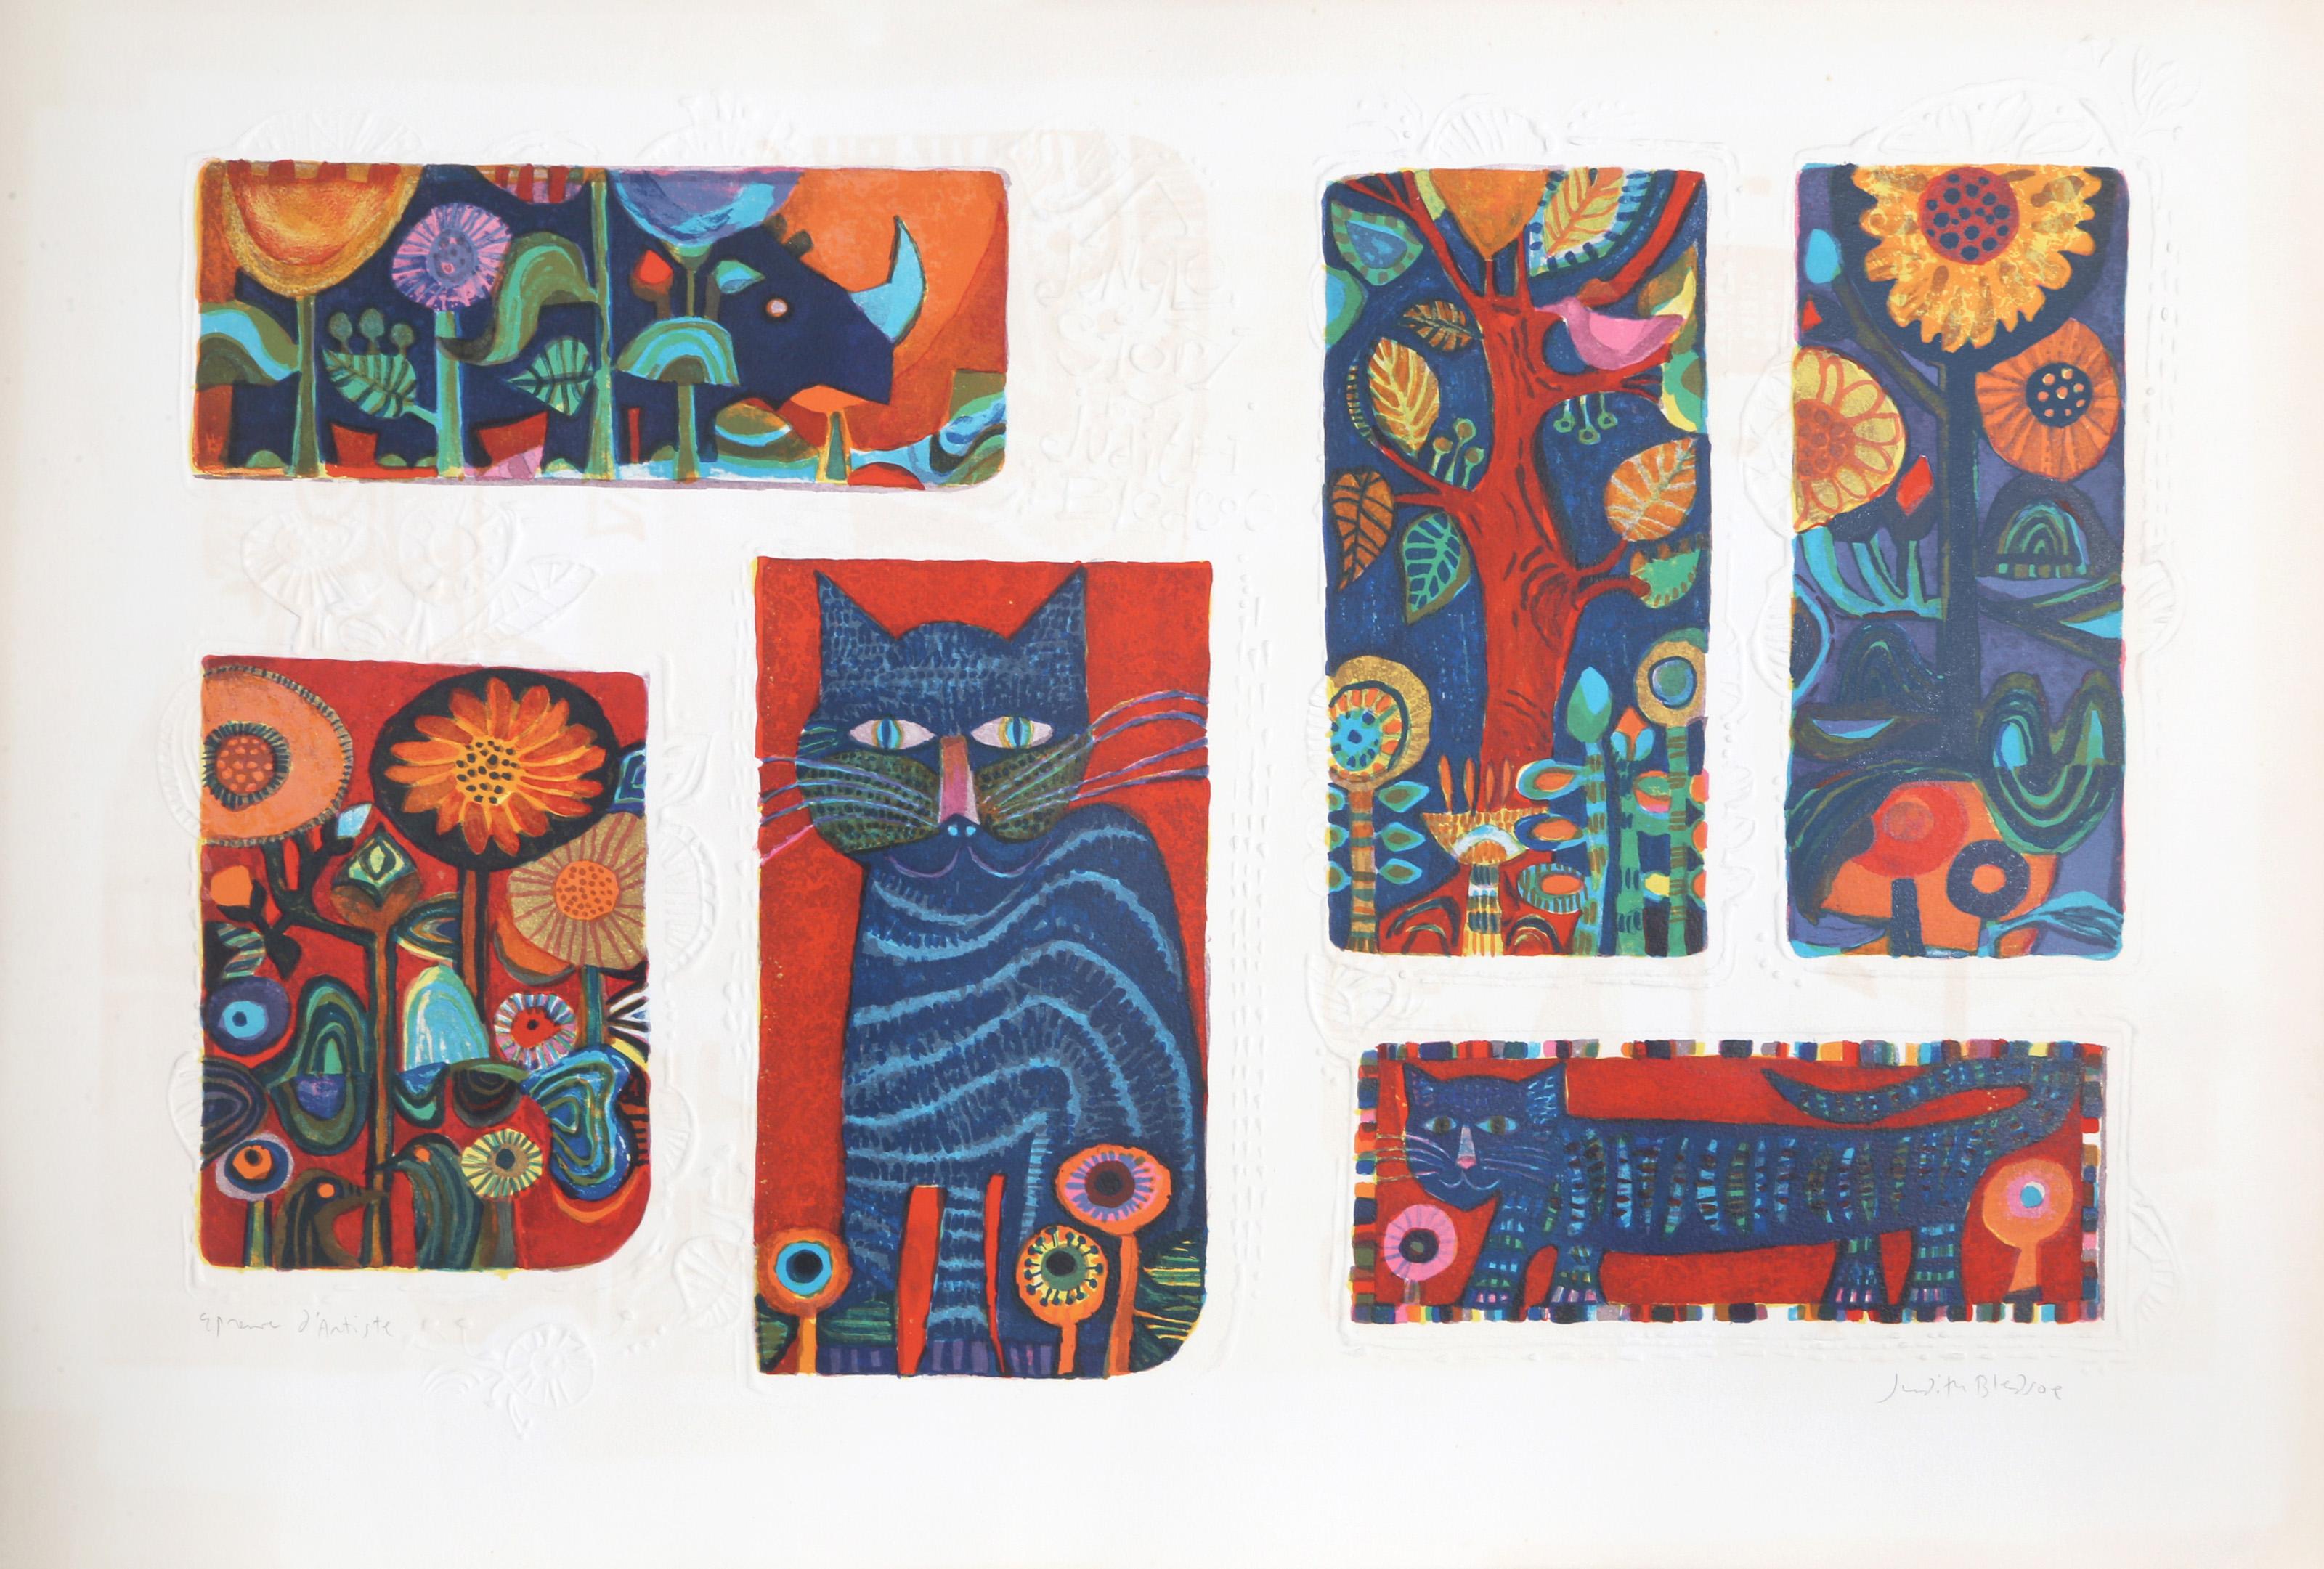 Judith Bledsoe, American (1938 - 2013) -  Cats and Flowers. Year: circa 1980, Medium: Lithograph with Blind Embossing, signed in pencil, Edition: EA, Size: 24 x 35 in. (60.96 x 88.9 cm), Description: In this multi-paneled composition, Judith Bledsoe